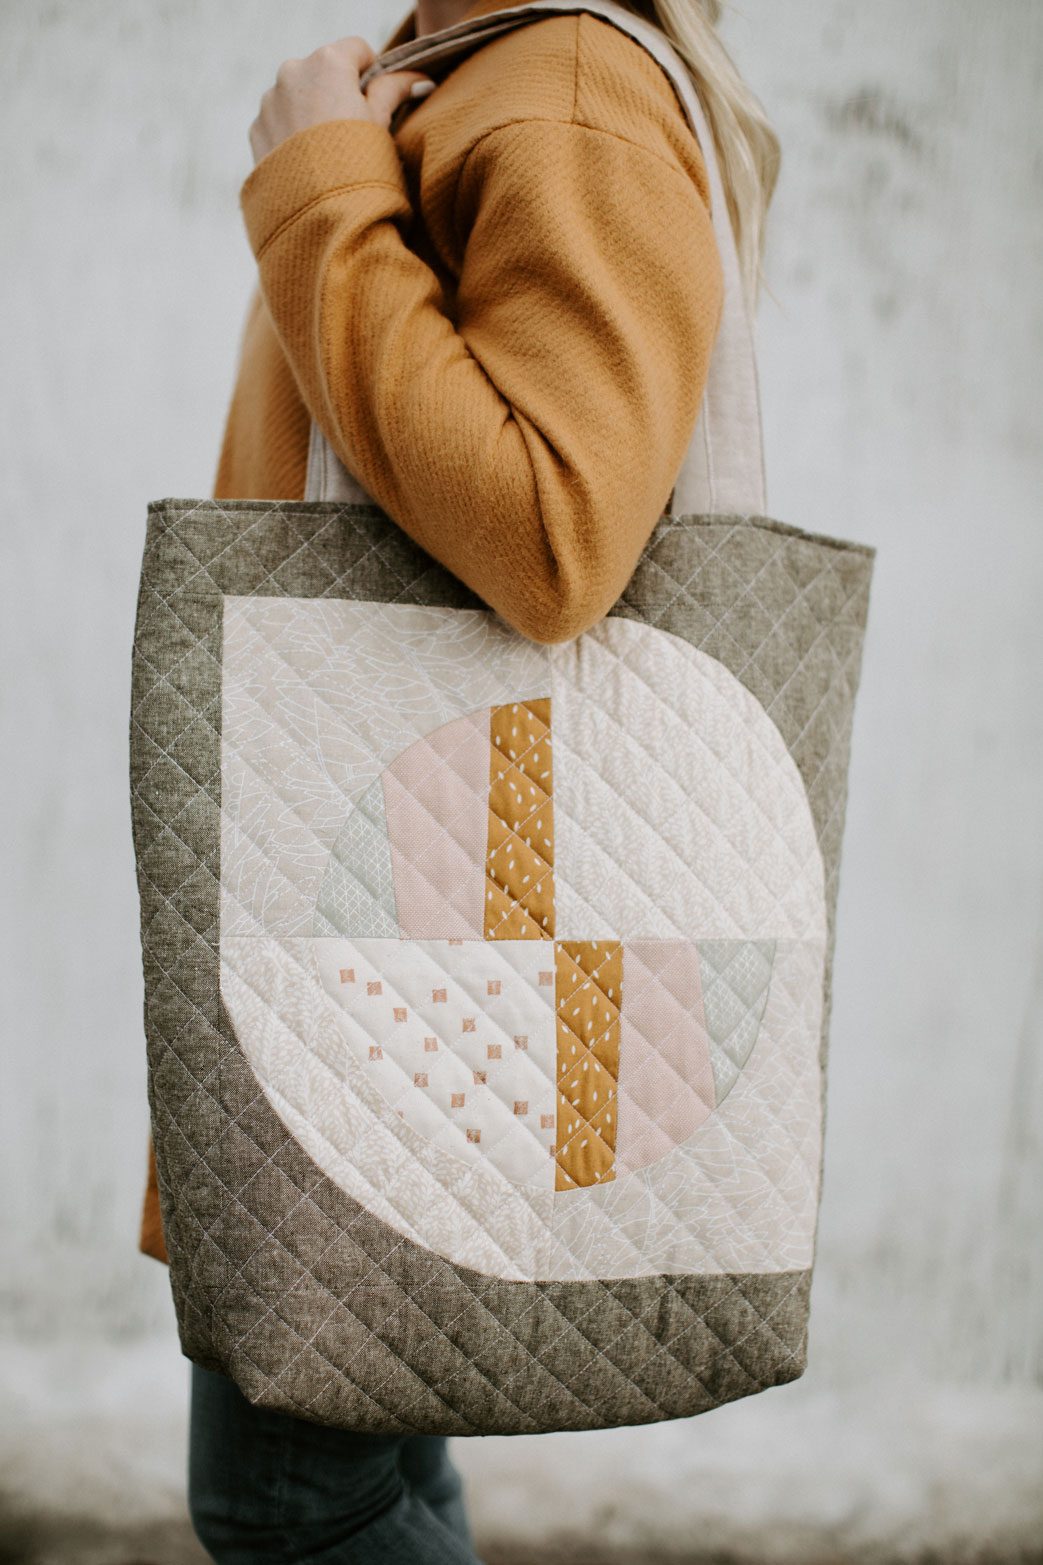 This FREE quilted tote bag tutorial shows step by step how to create a large tote bag using the Modern Fans quilt block pattern. suzyquilts.com #freesewingpattern